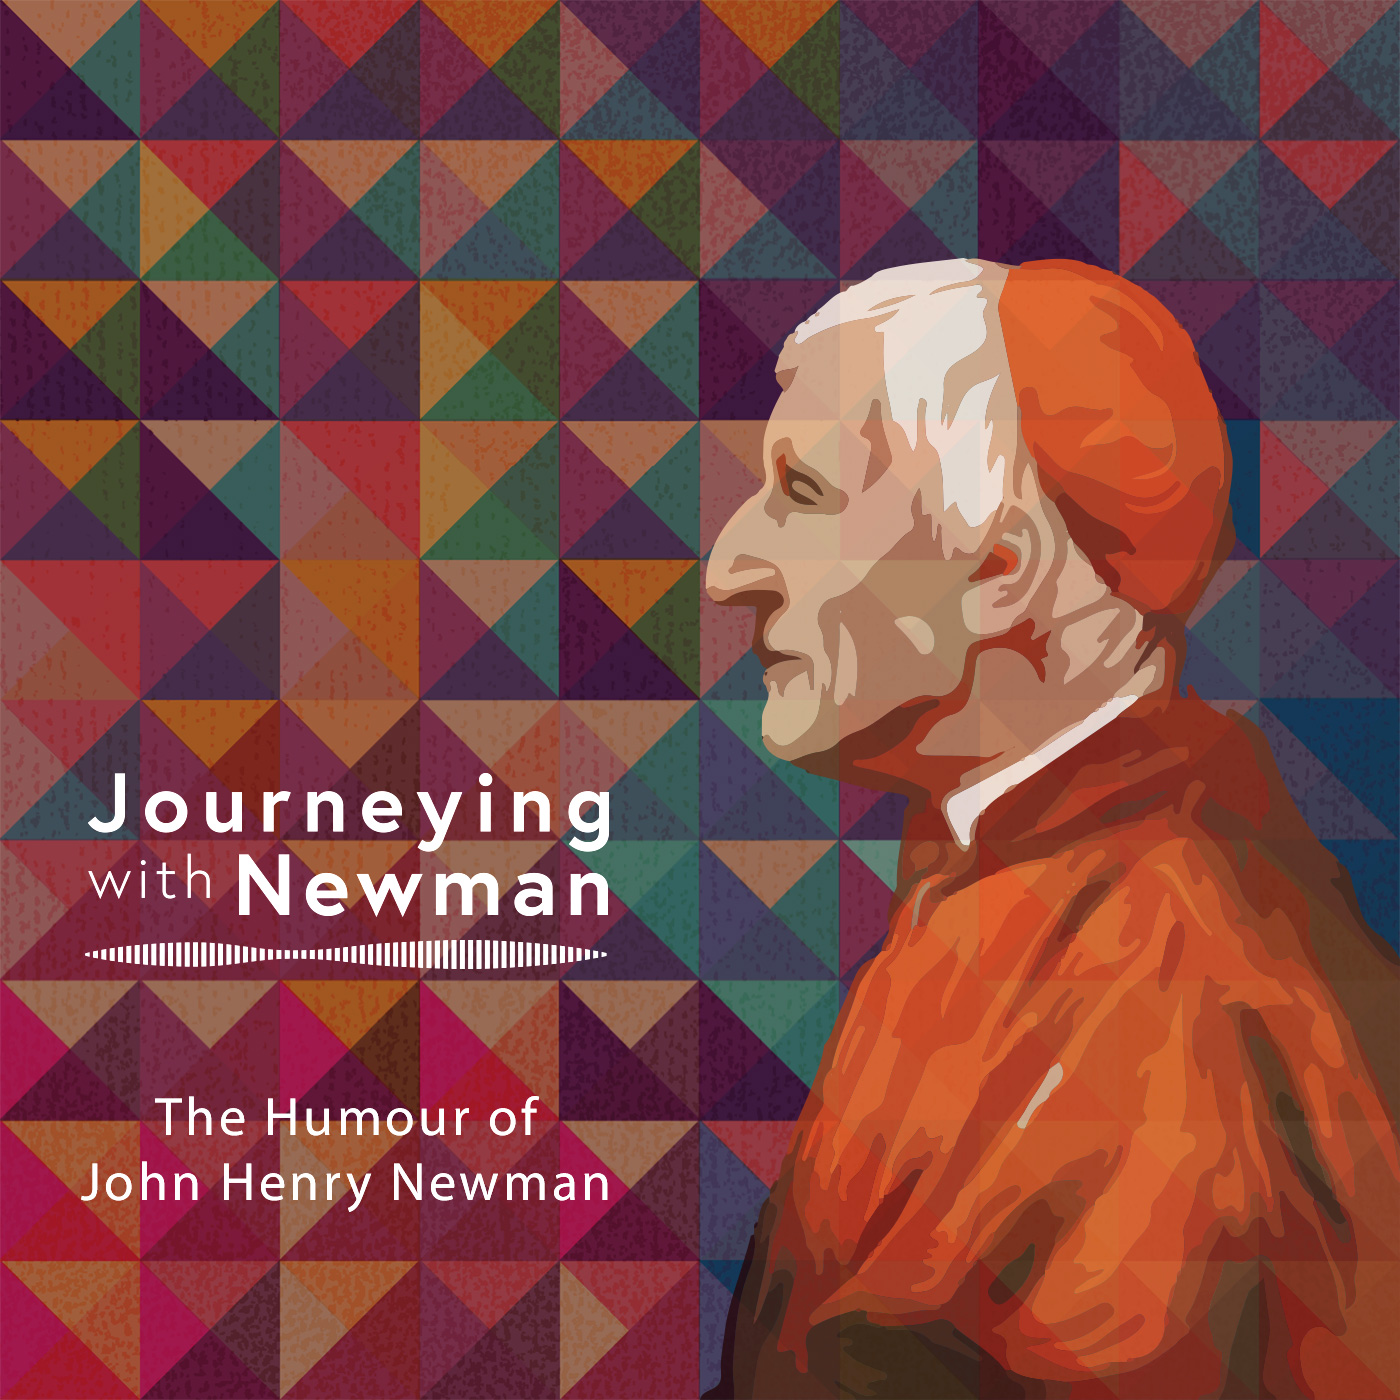 The Humour of John Henry Newman